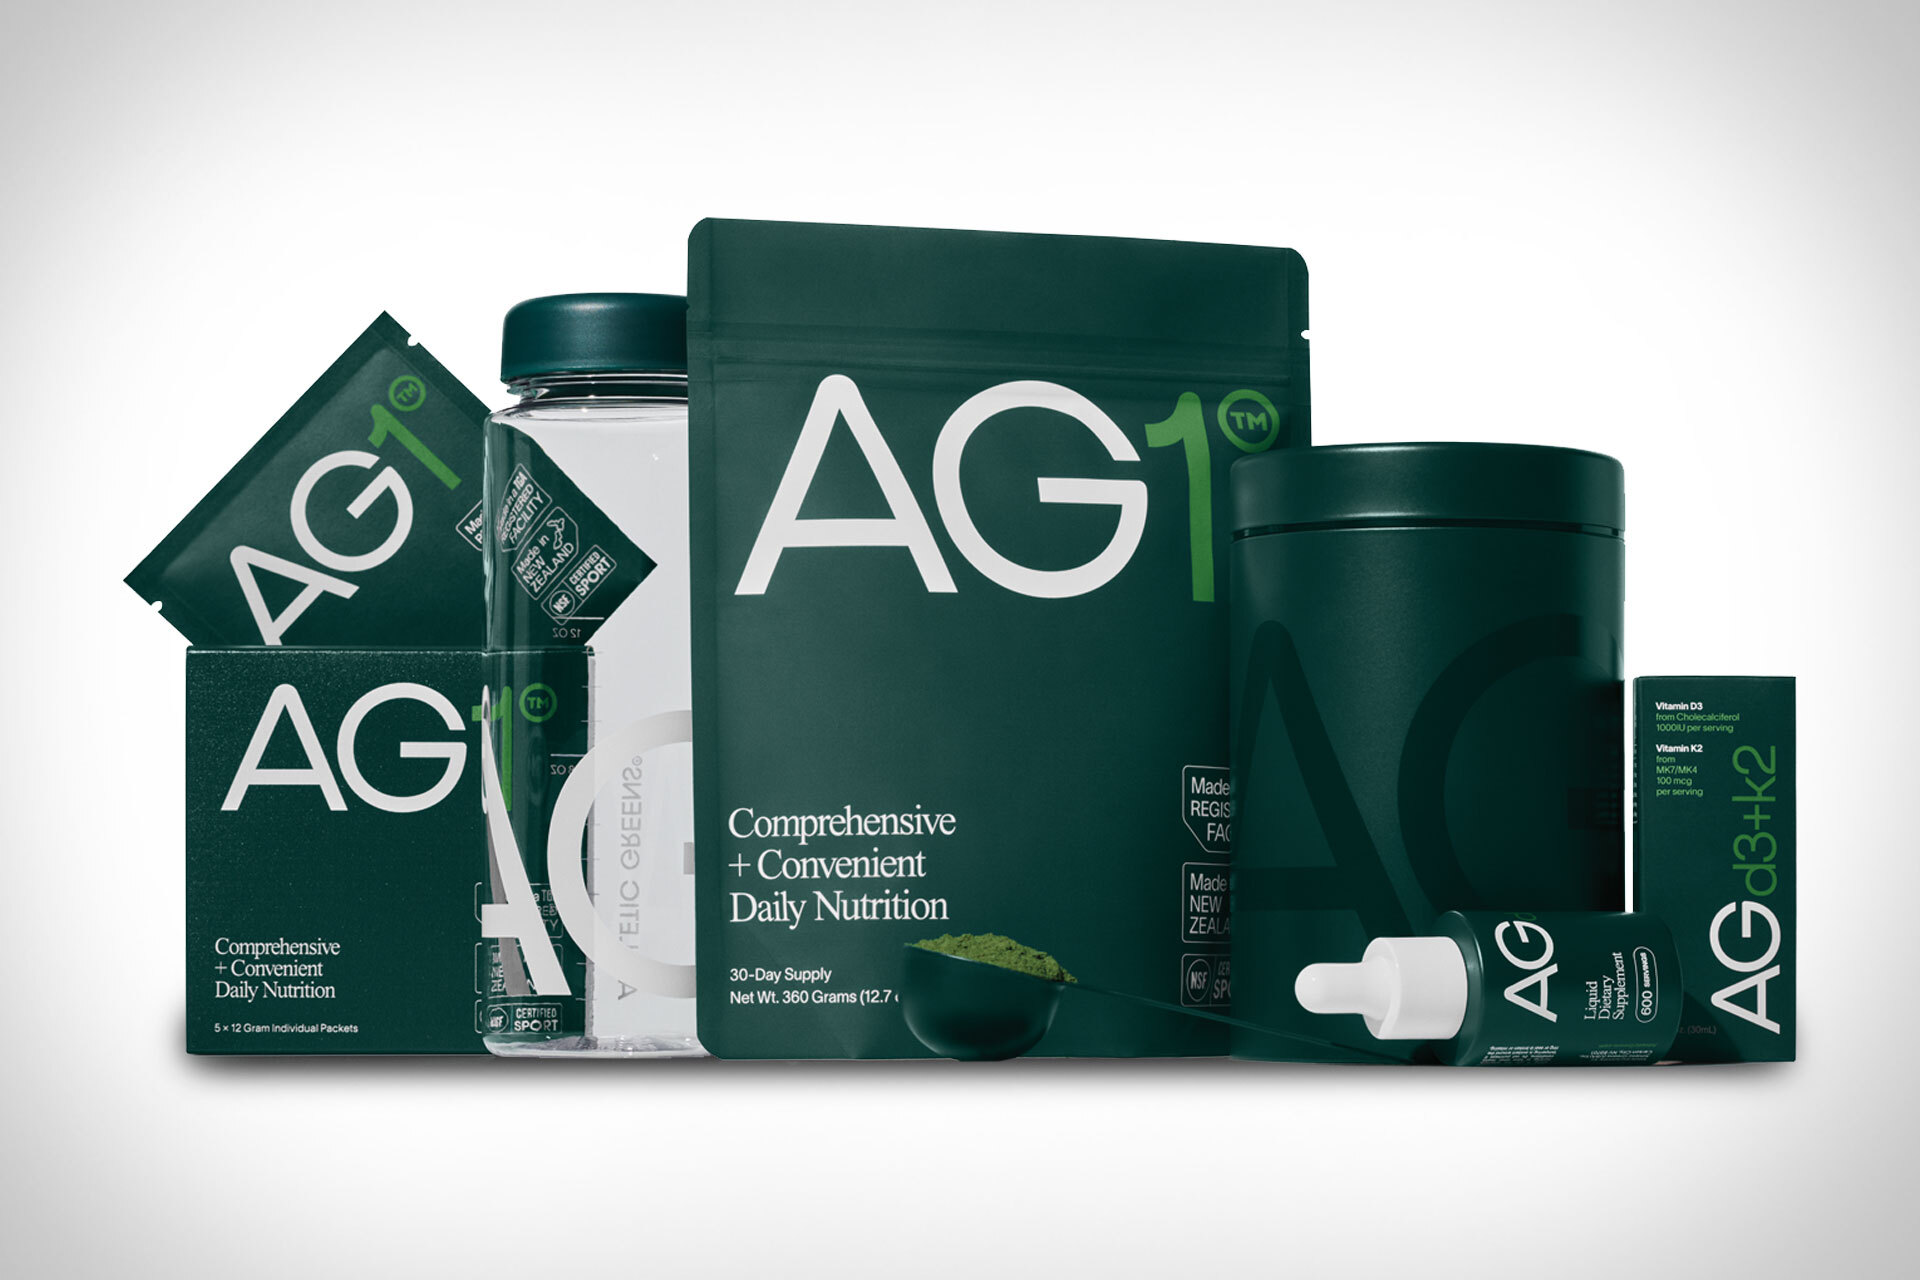 AG1 by Athletic Greens | Uncrate, #AG1 #Athletic #Greens #Uncrate